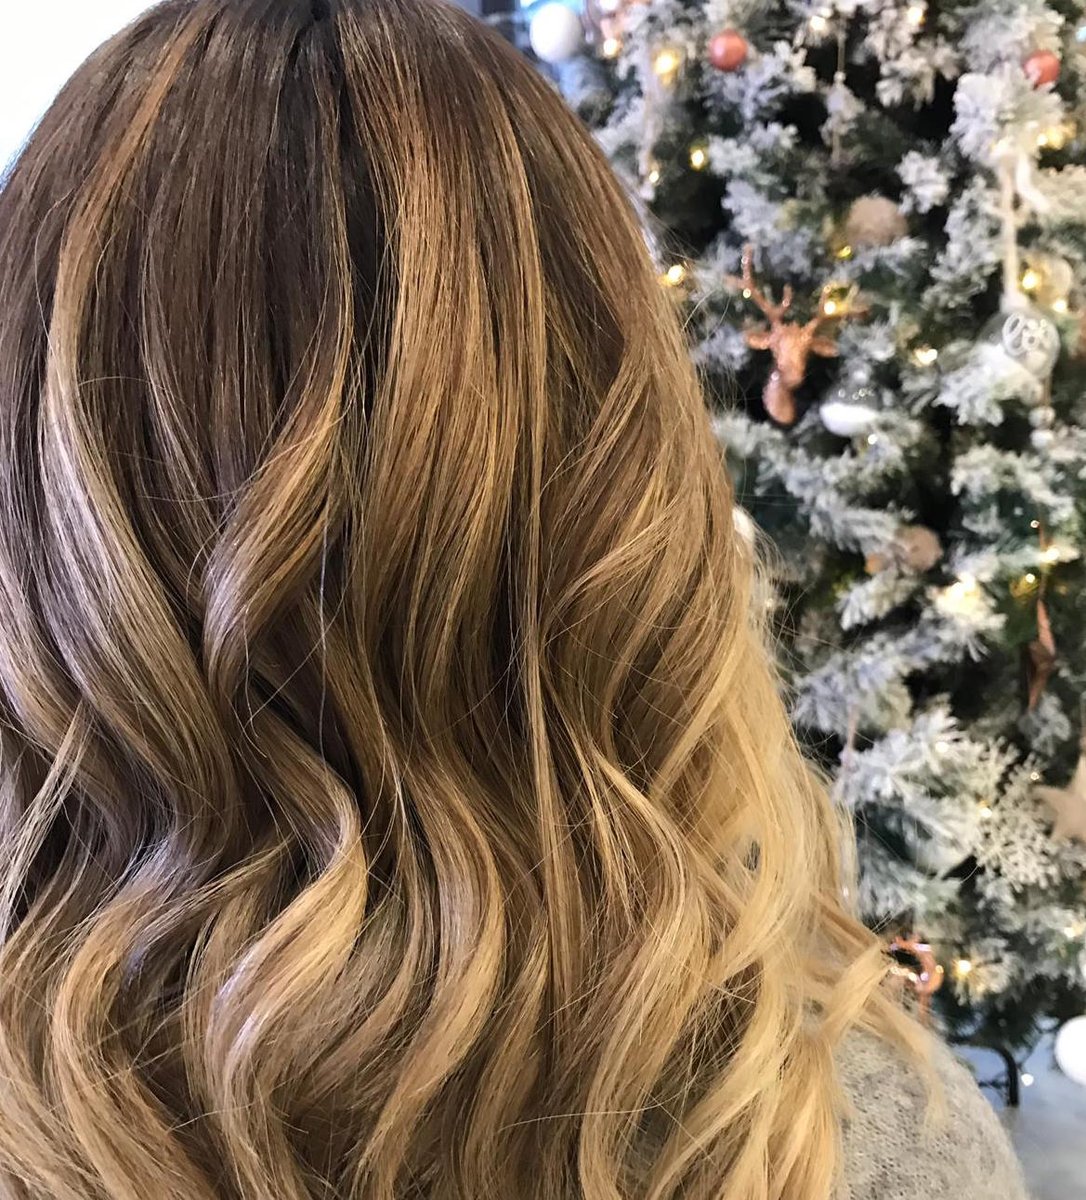 Caramel Balayage | These locks look so delicious we're starting to feel hungry #caramelbalayage #balayage #blondehair #hairtransformation #preenyourself